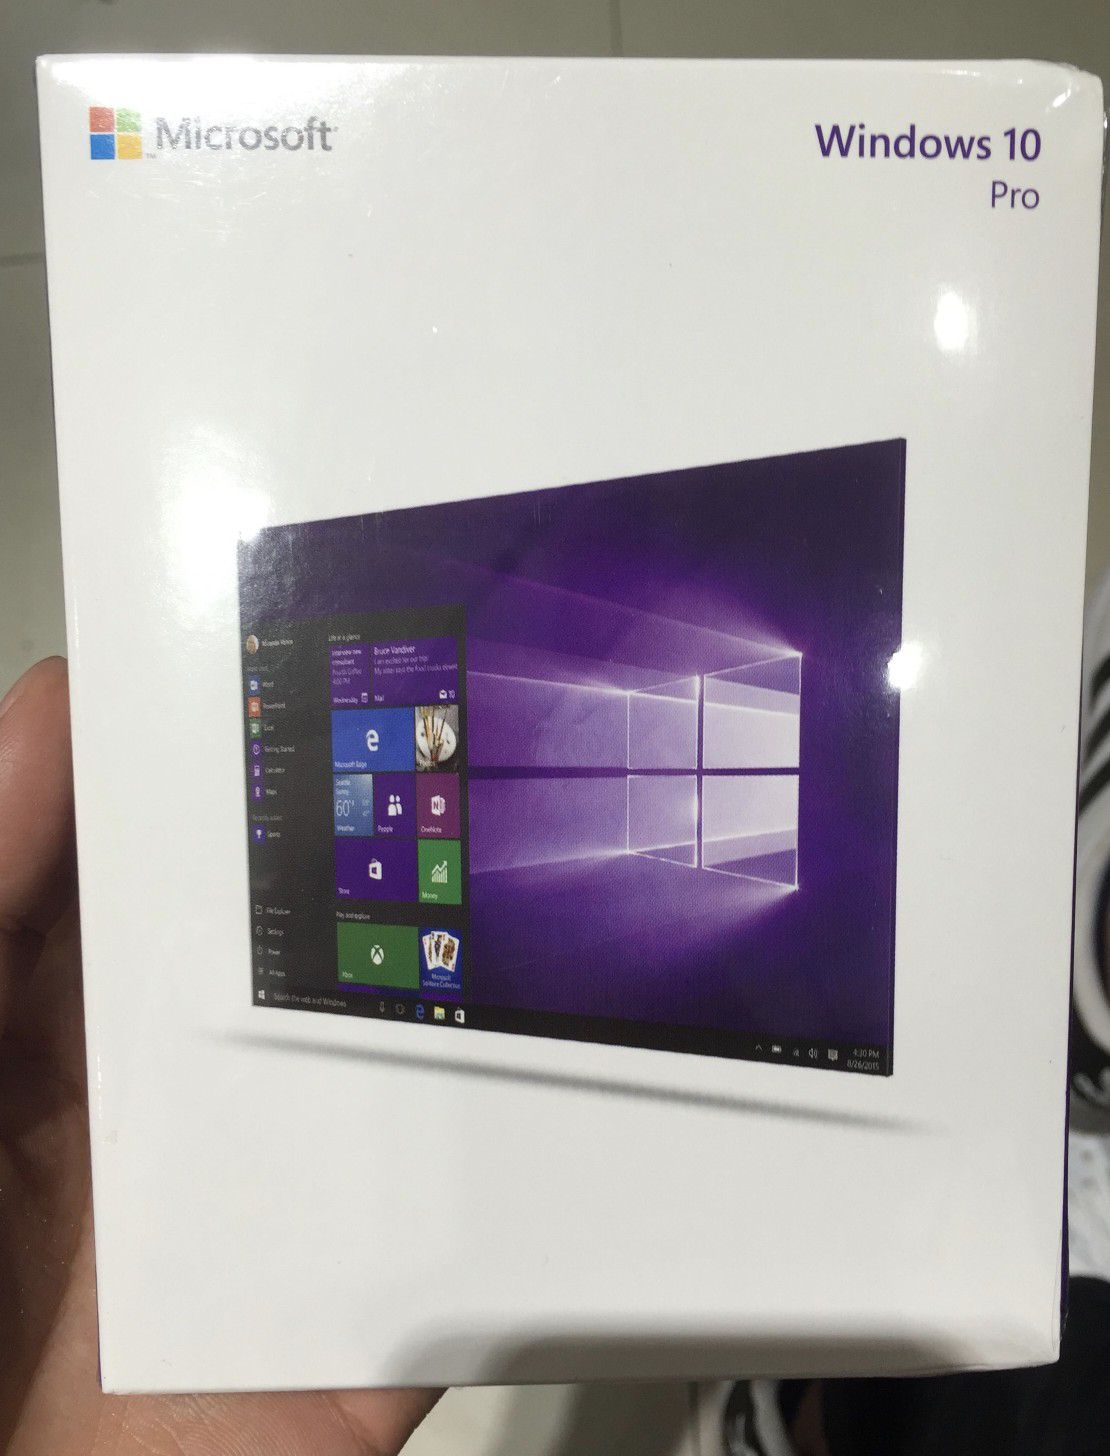 Windows 10 Pro software for computer and desktop PC systems rims car bike motor iPhone iPad MacBook pro iMac apple watch Samsung s10 note 10